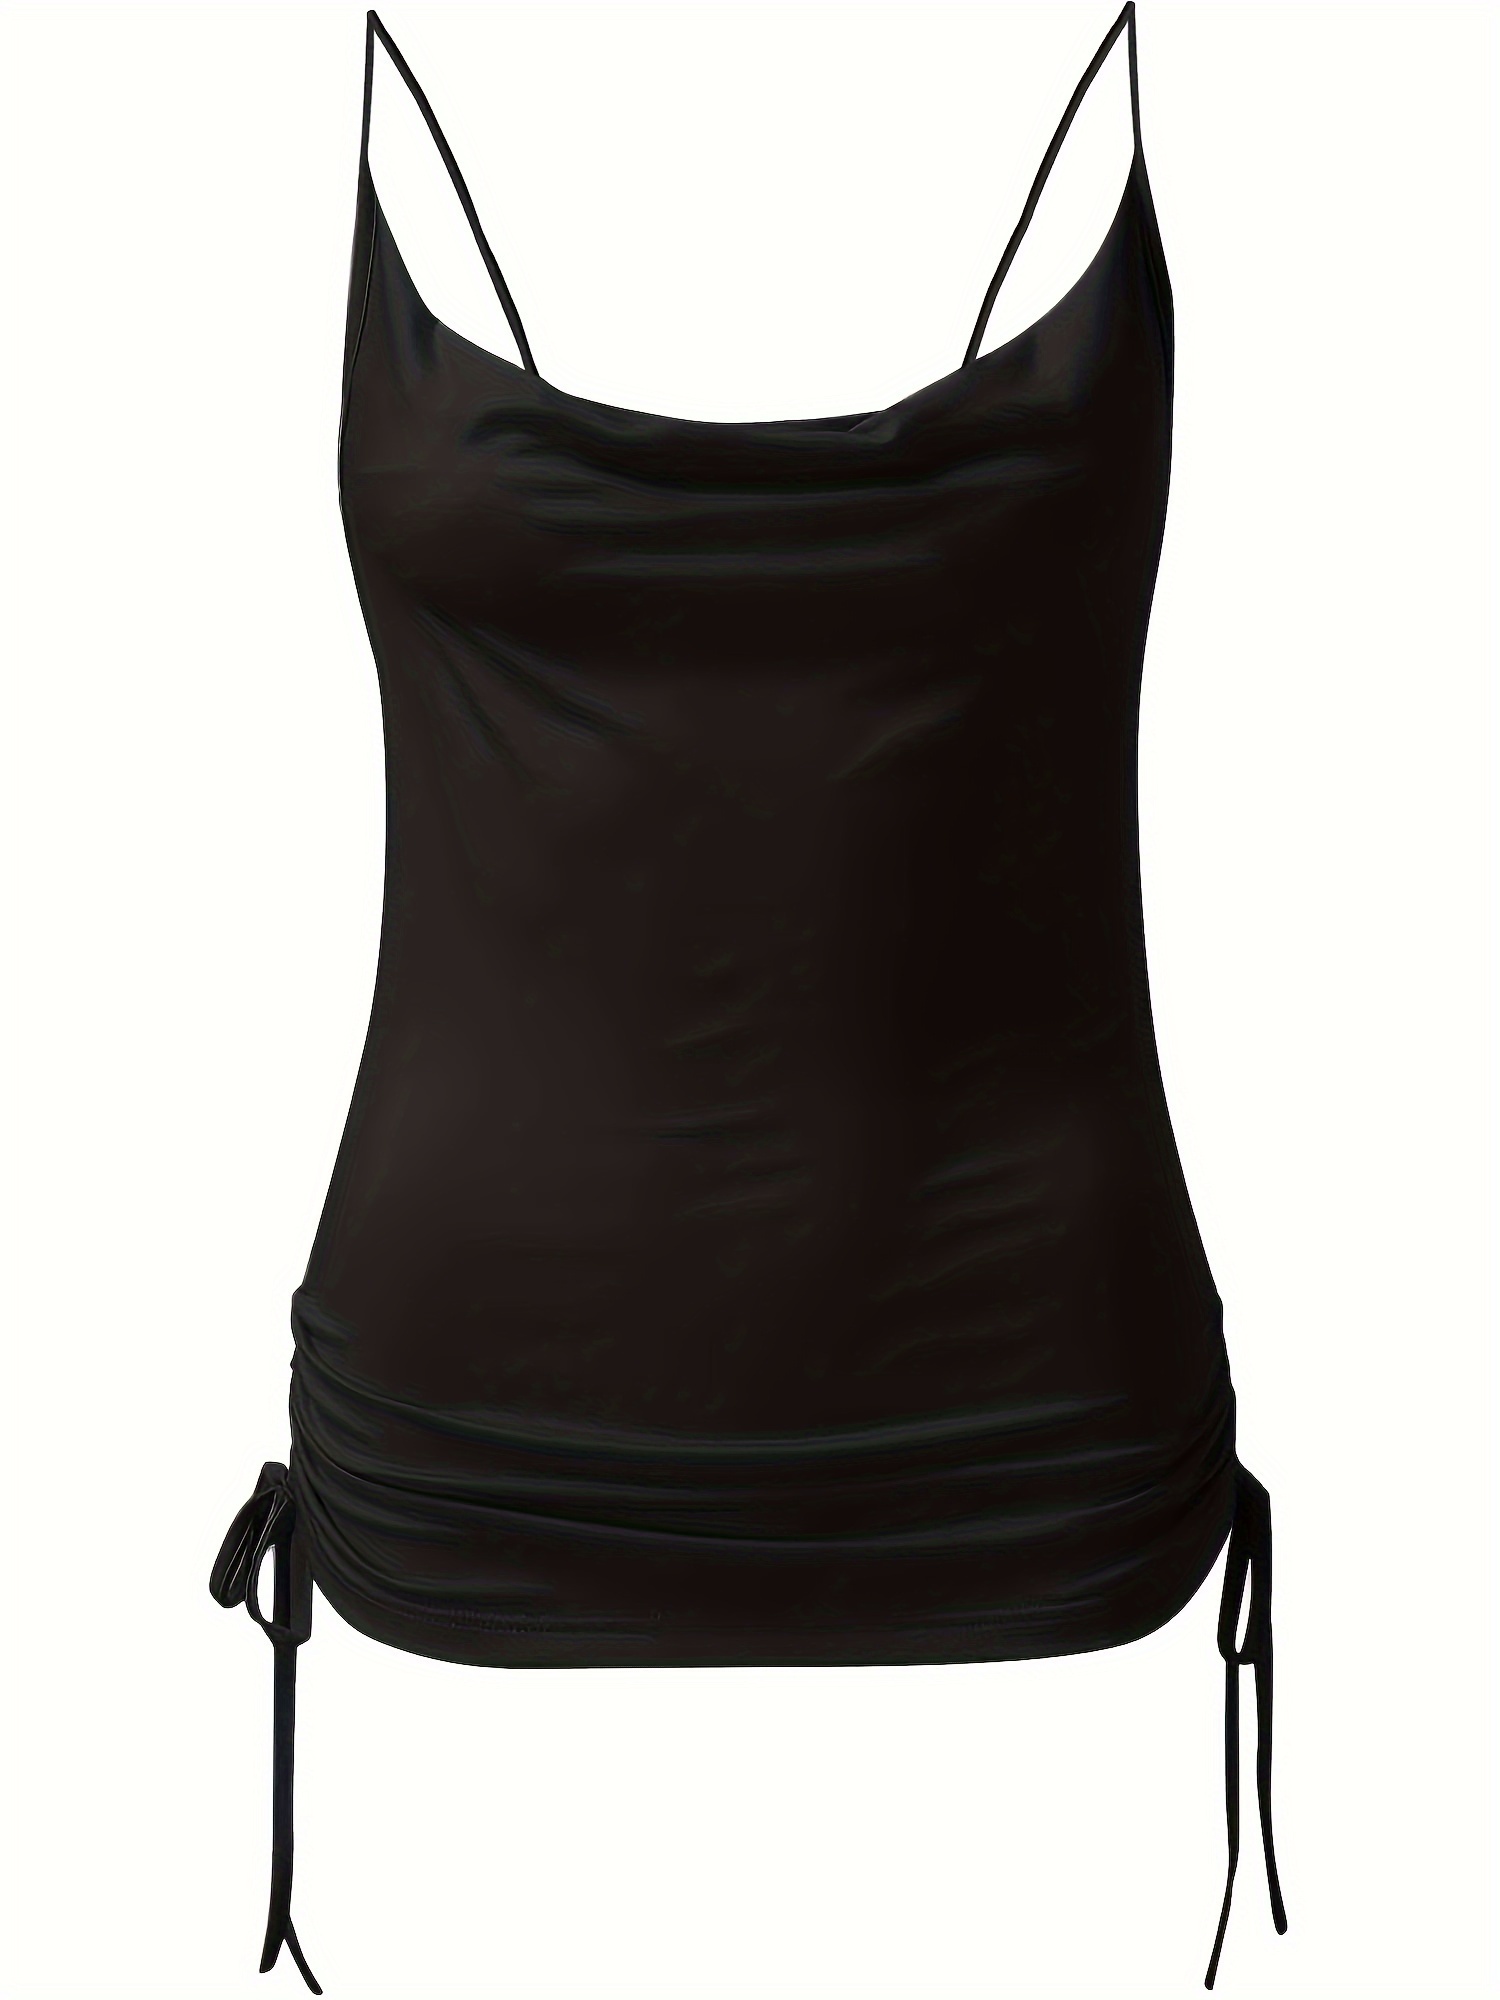 Sleeveless Tank-Top for Women Backless Camisole Strap Party Tops